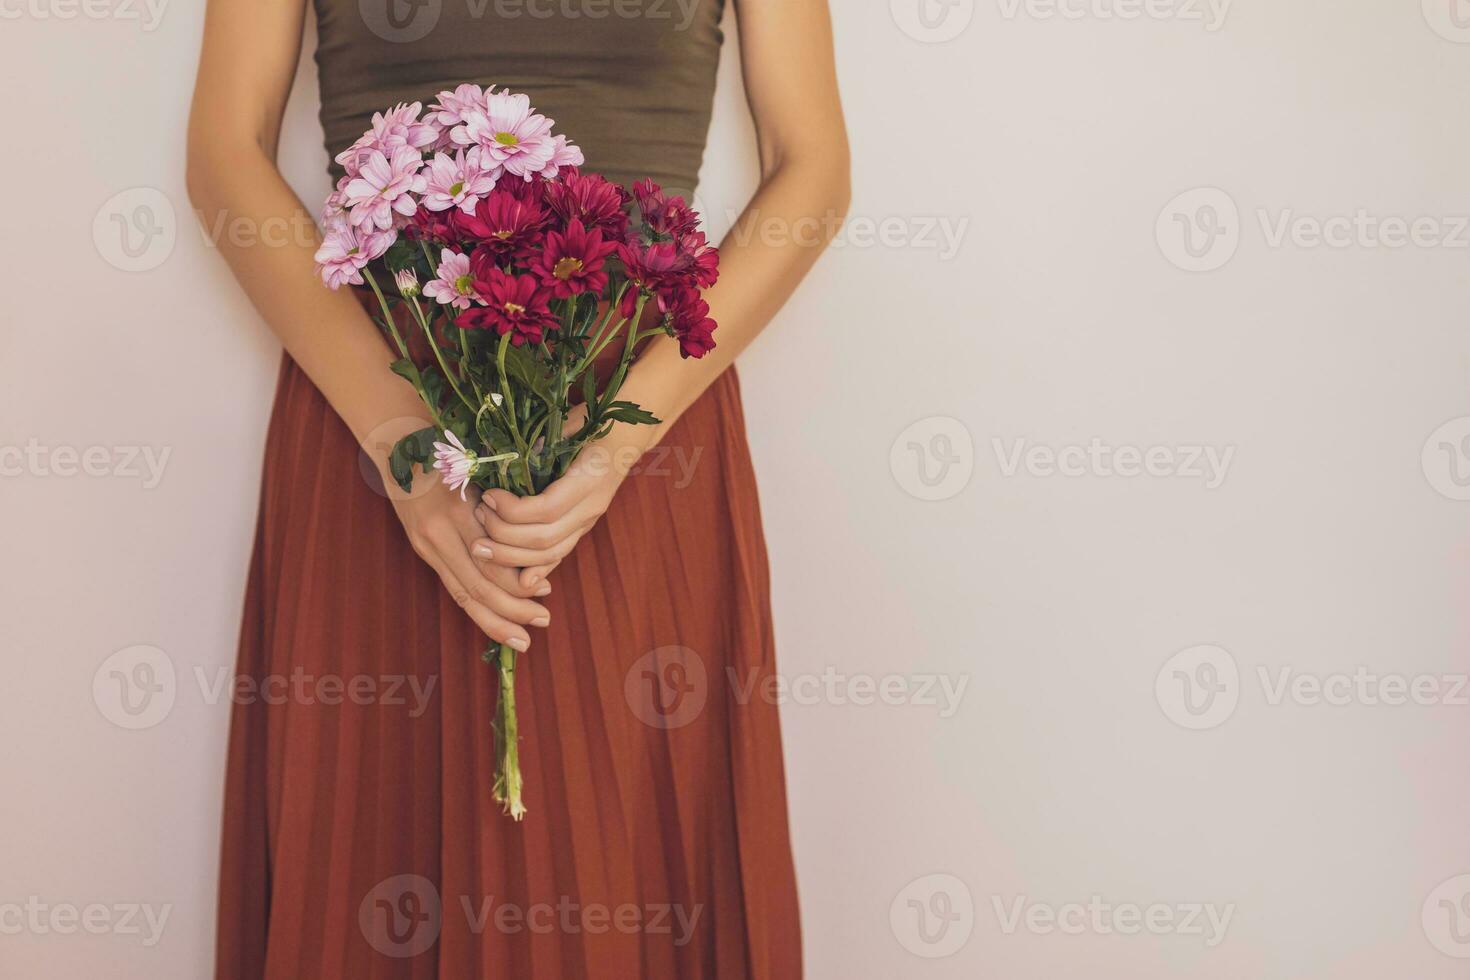 Woman holding beautiful bouquet of flowers.Focus on flowers. photo